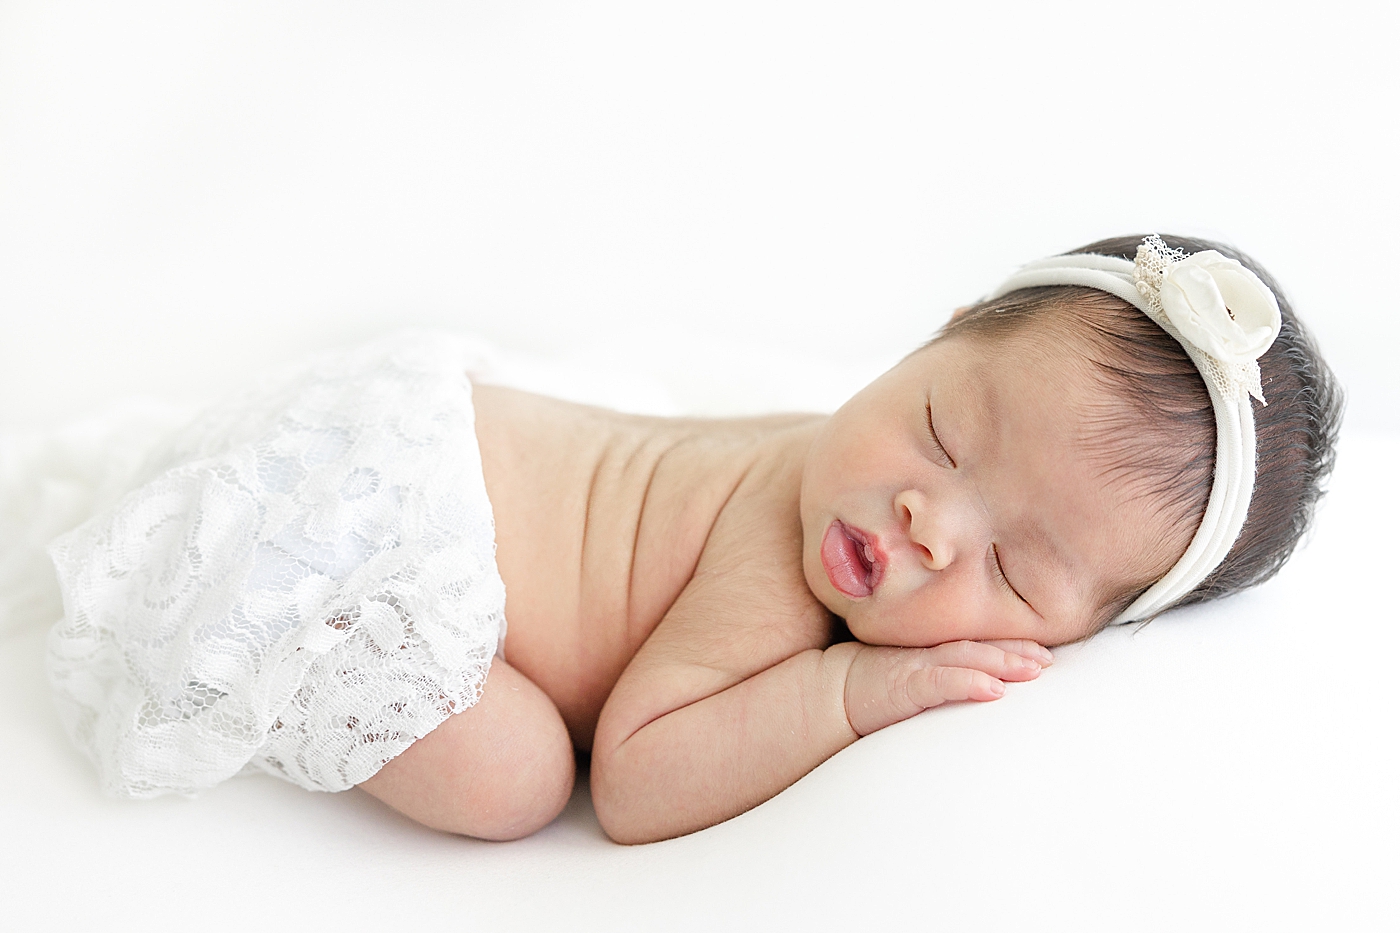 Sleeping newborn in lace bloomers and white headband | Image by Sana Ahmed